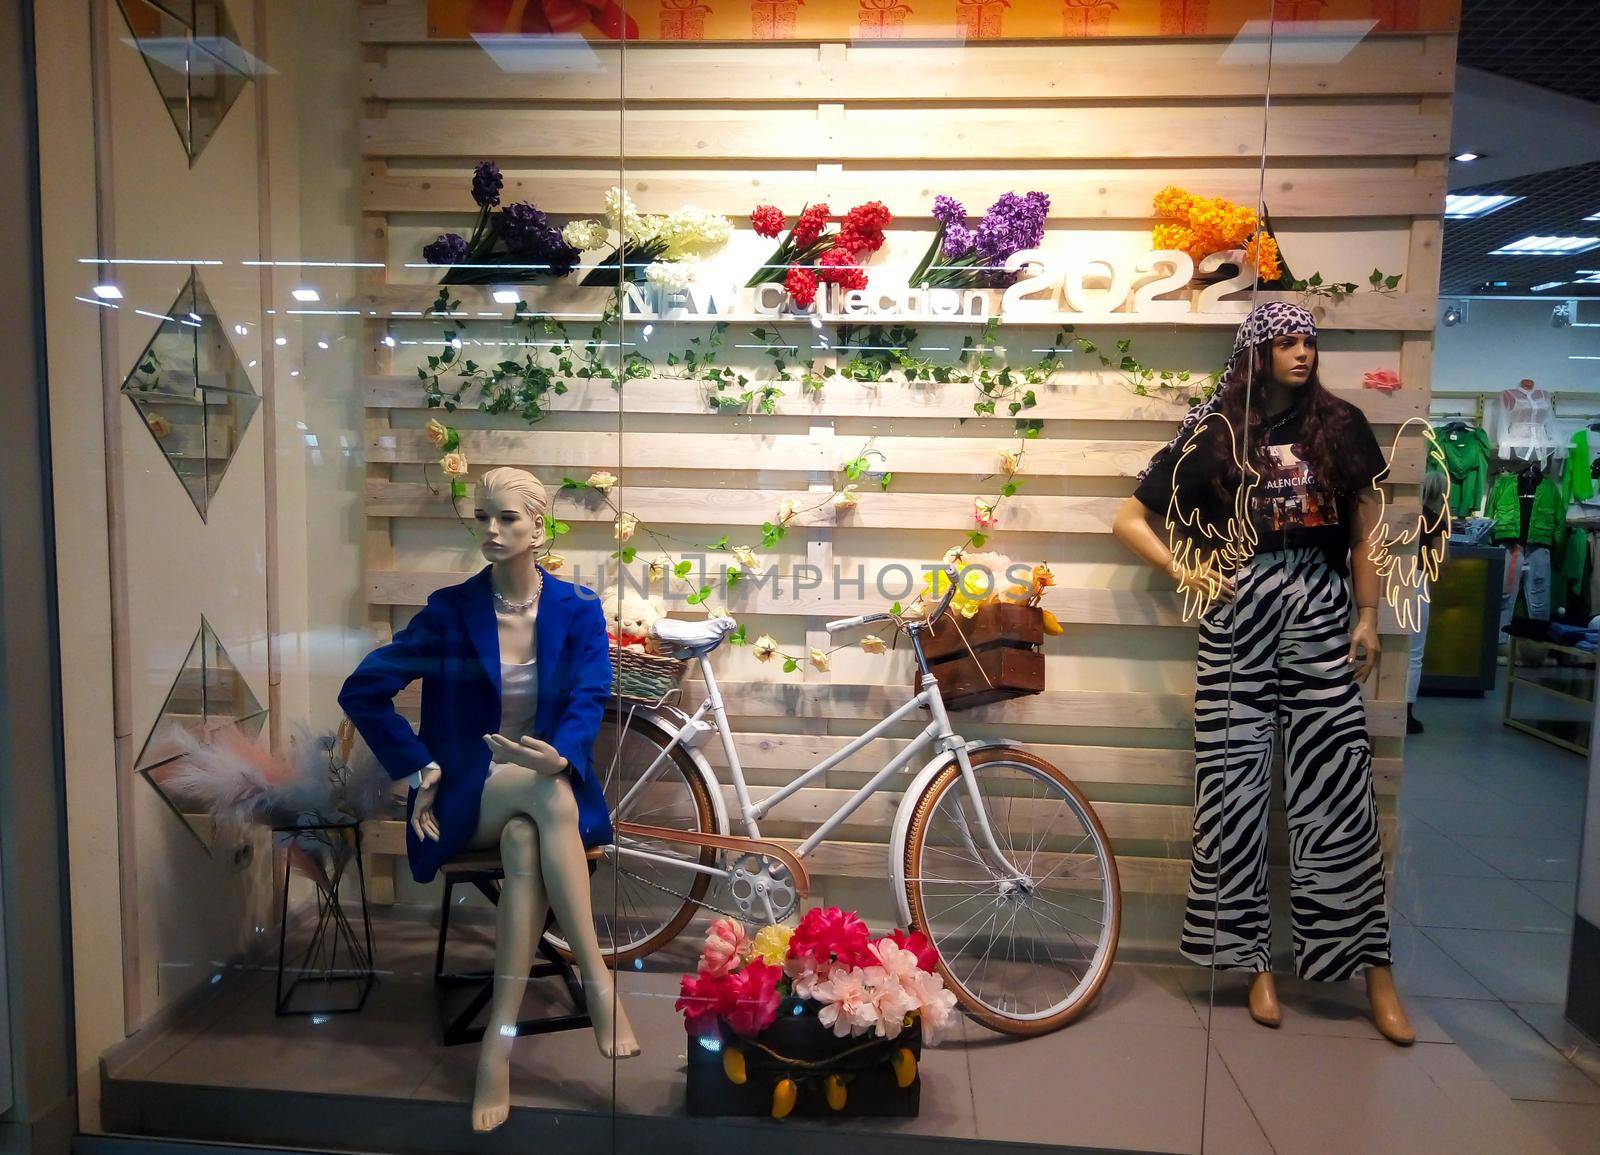 Shop window with mannequins, beautiful shopping center design.